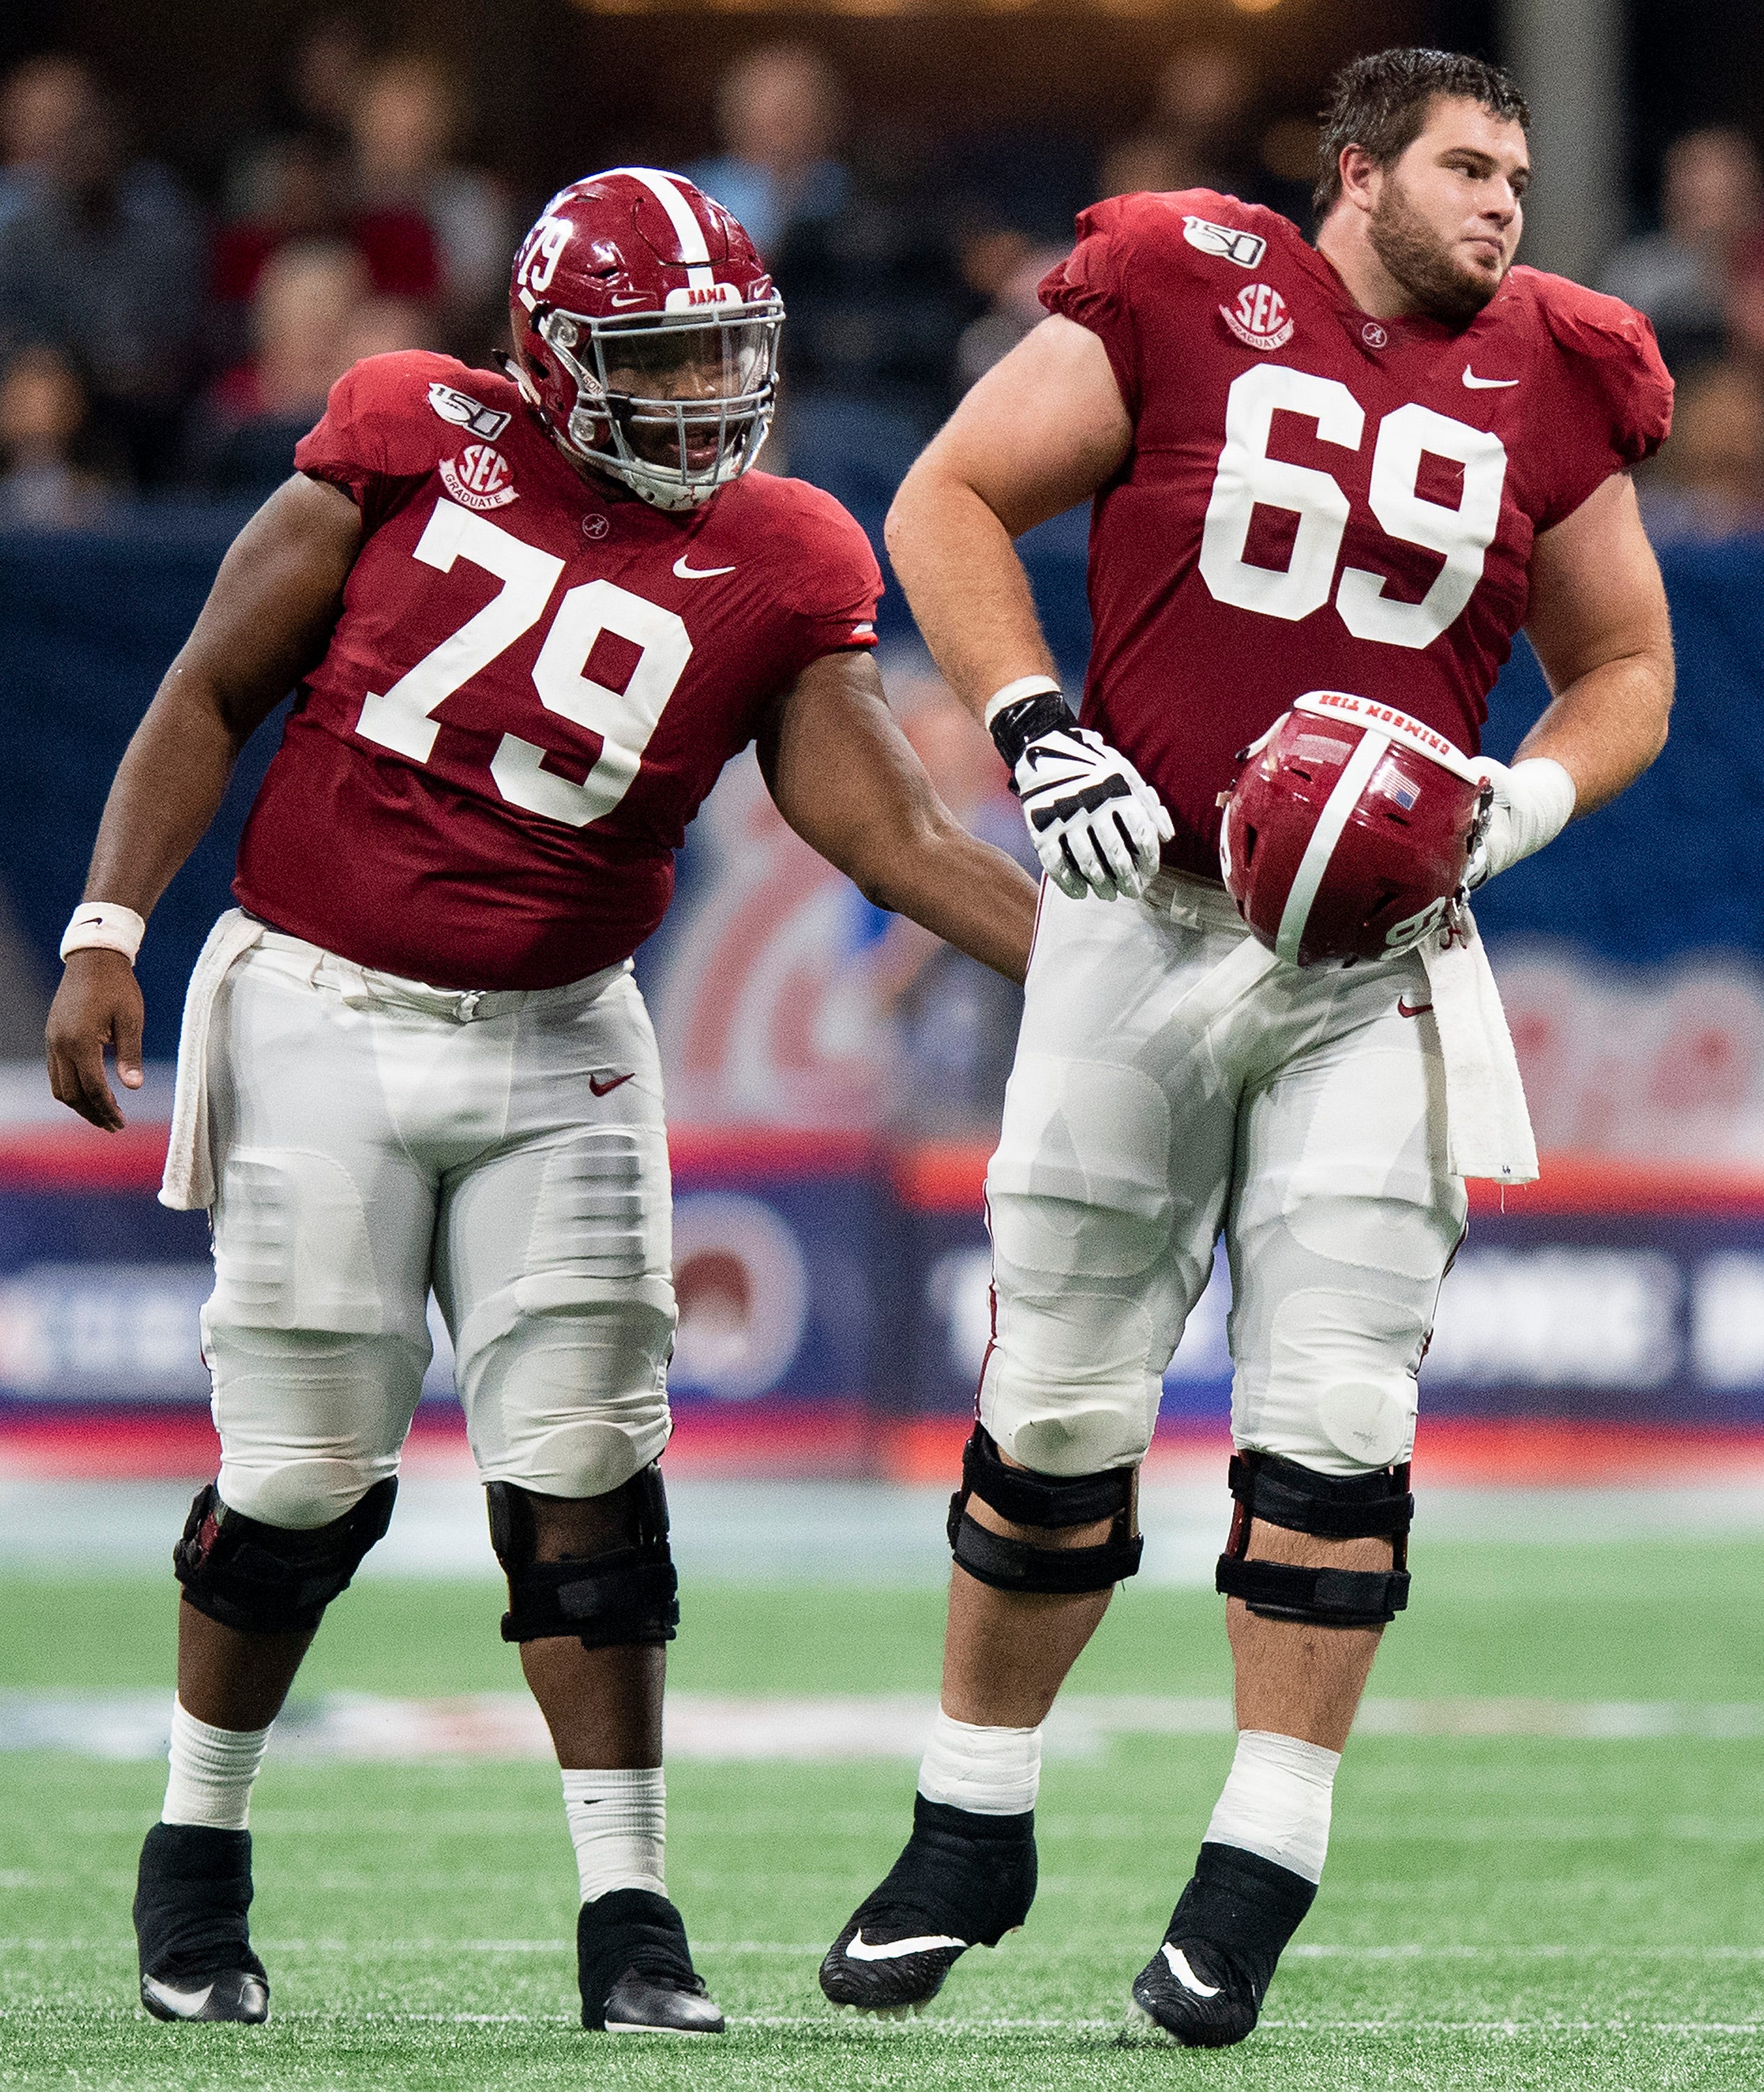 Alabama offensive linemen Chris Owens (79) and Landon Dickerson (69) against Duke in the Chick-fil-A Kickoff Game at Mercedes Benz Stadium in Atlanta, Ga., on Saturday August 31, 2019.